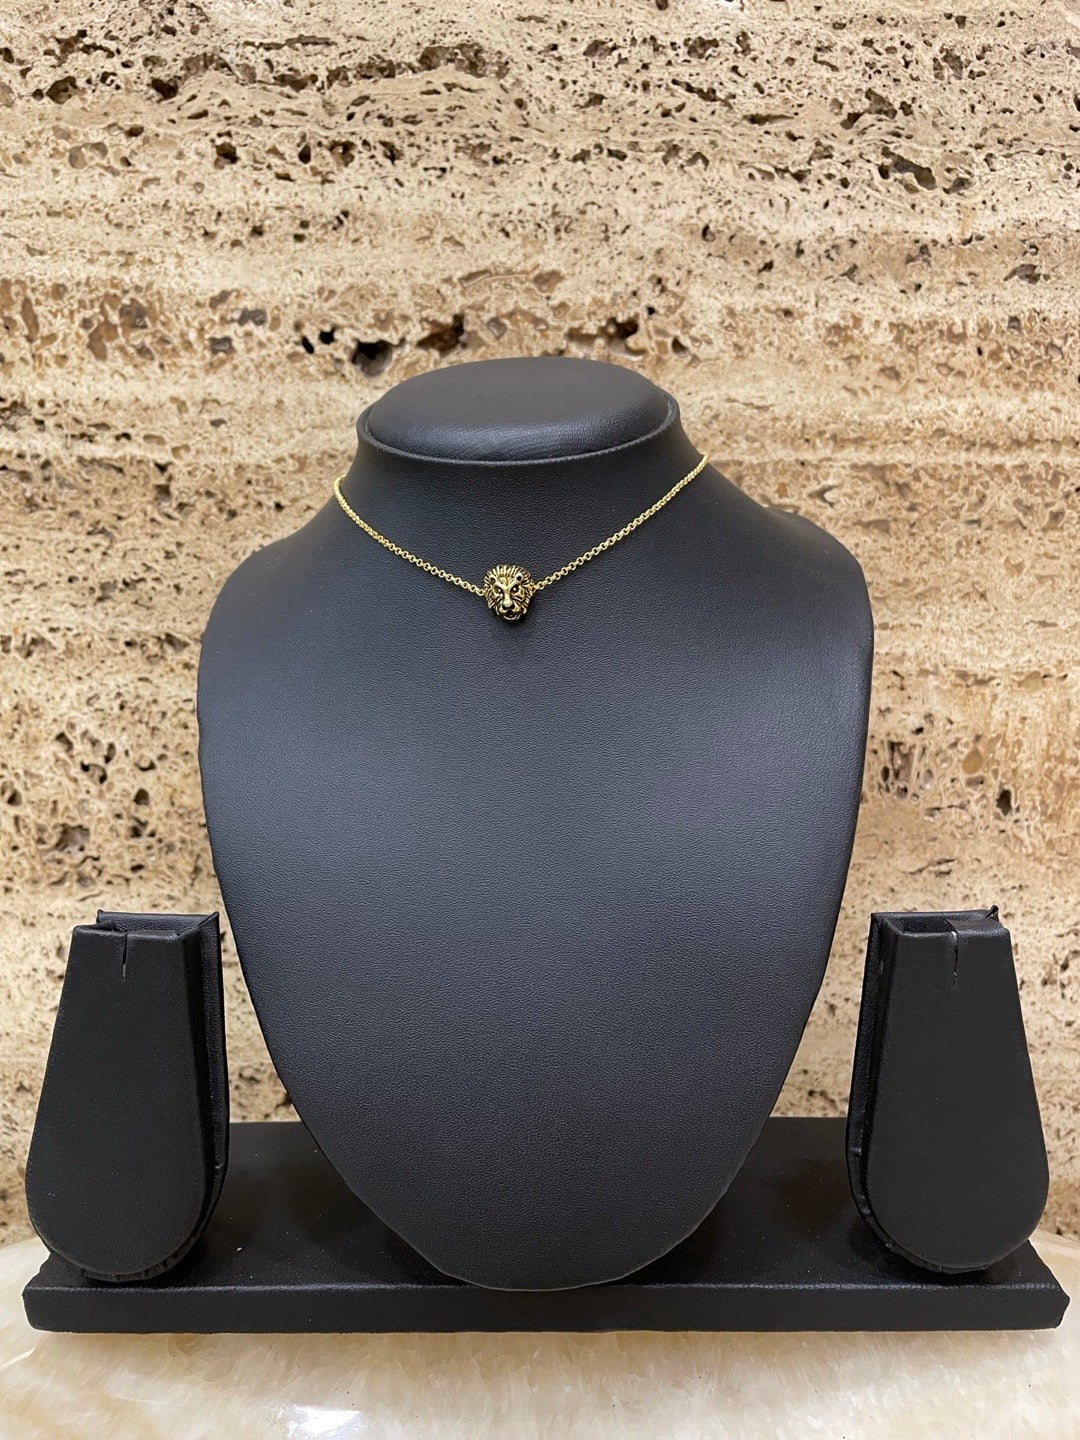 Handmade leather choker necklace with pendant – Atlas Goods by Your Needs  Company